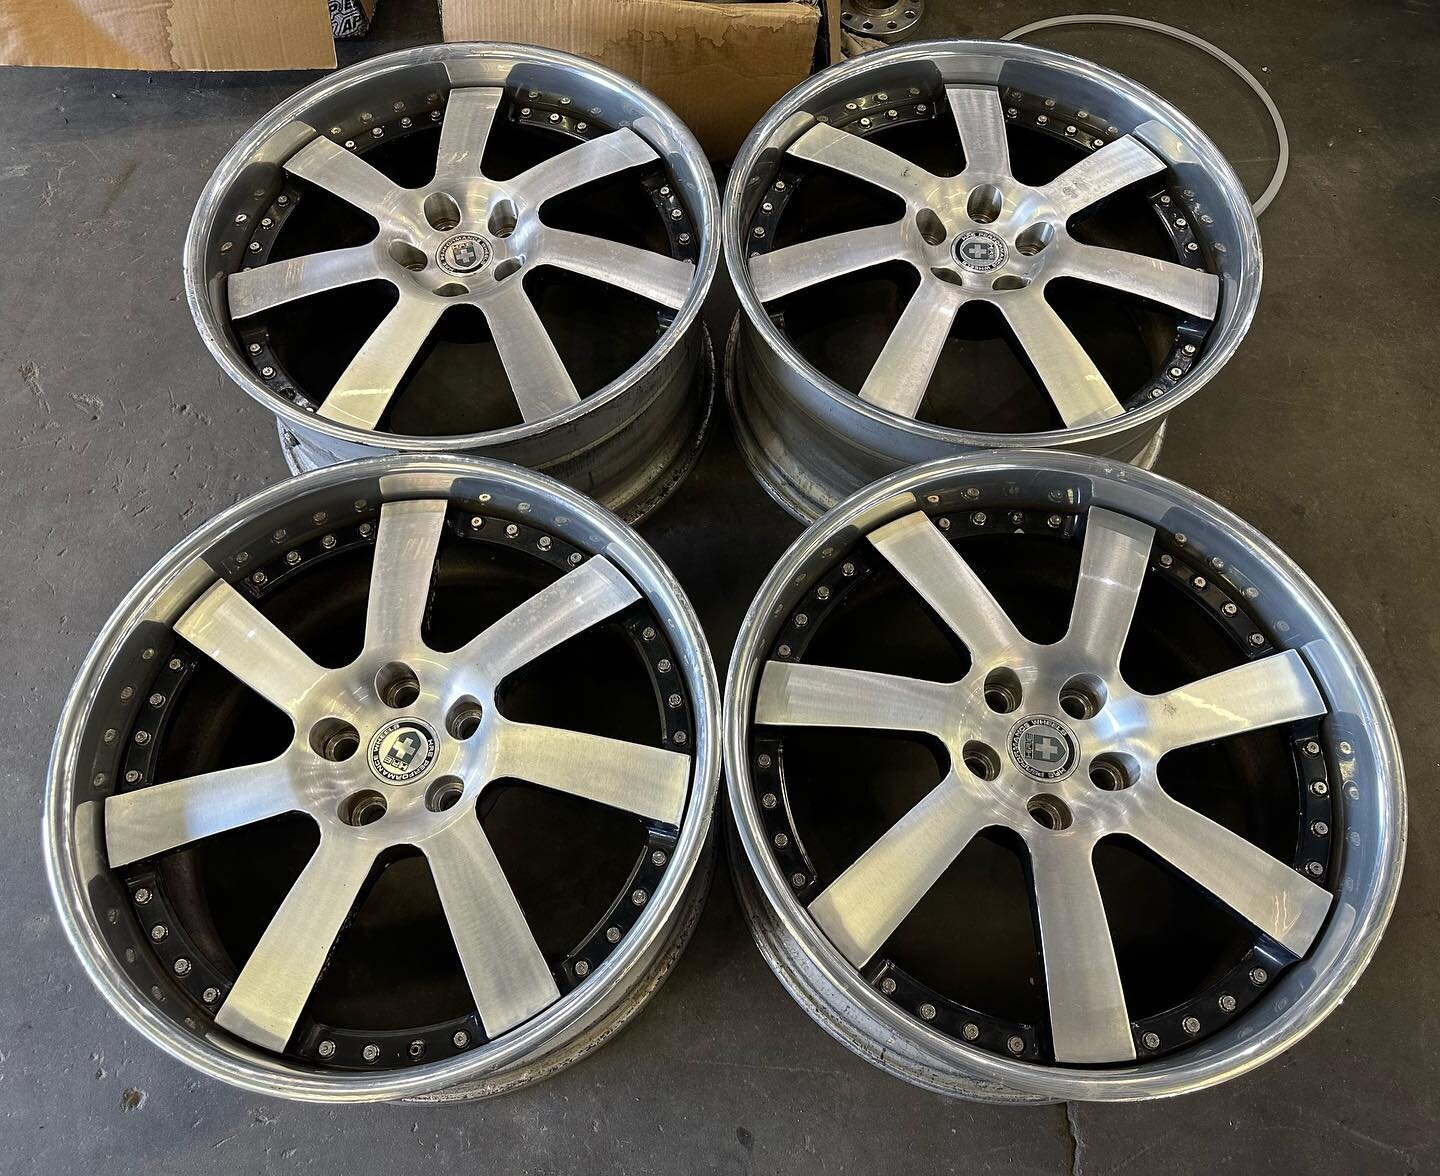 5x120
21x10
+45
.
HRE 993R
Land Rover fitment.
Wheels are in good condition but need a proper cleaning and re polish. 
.
$1000 takes them.
Shipping available